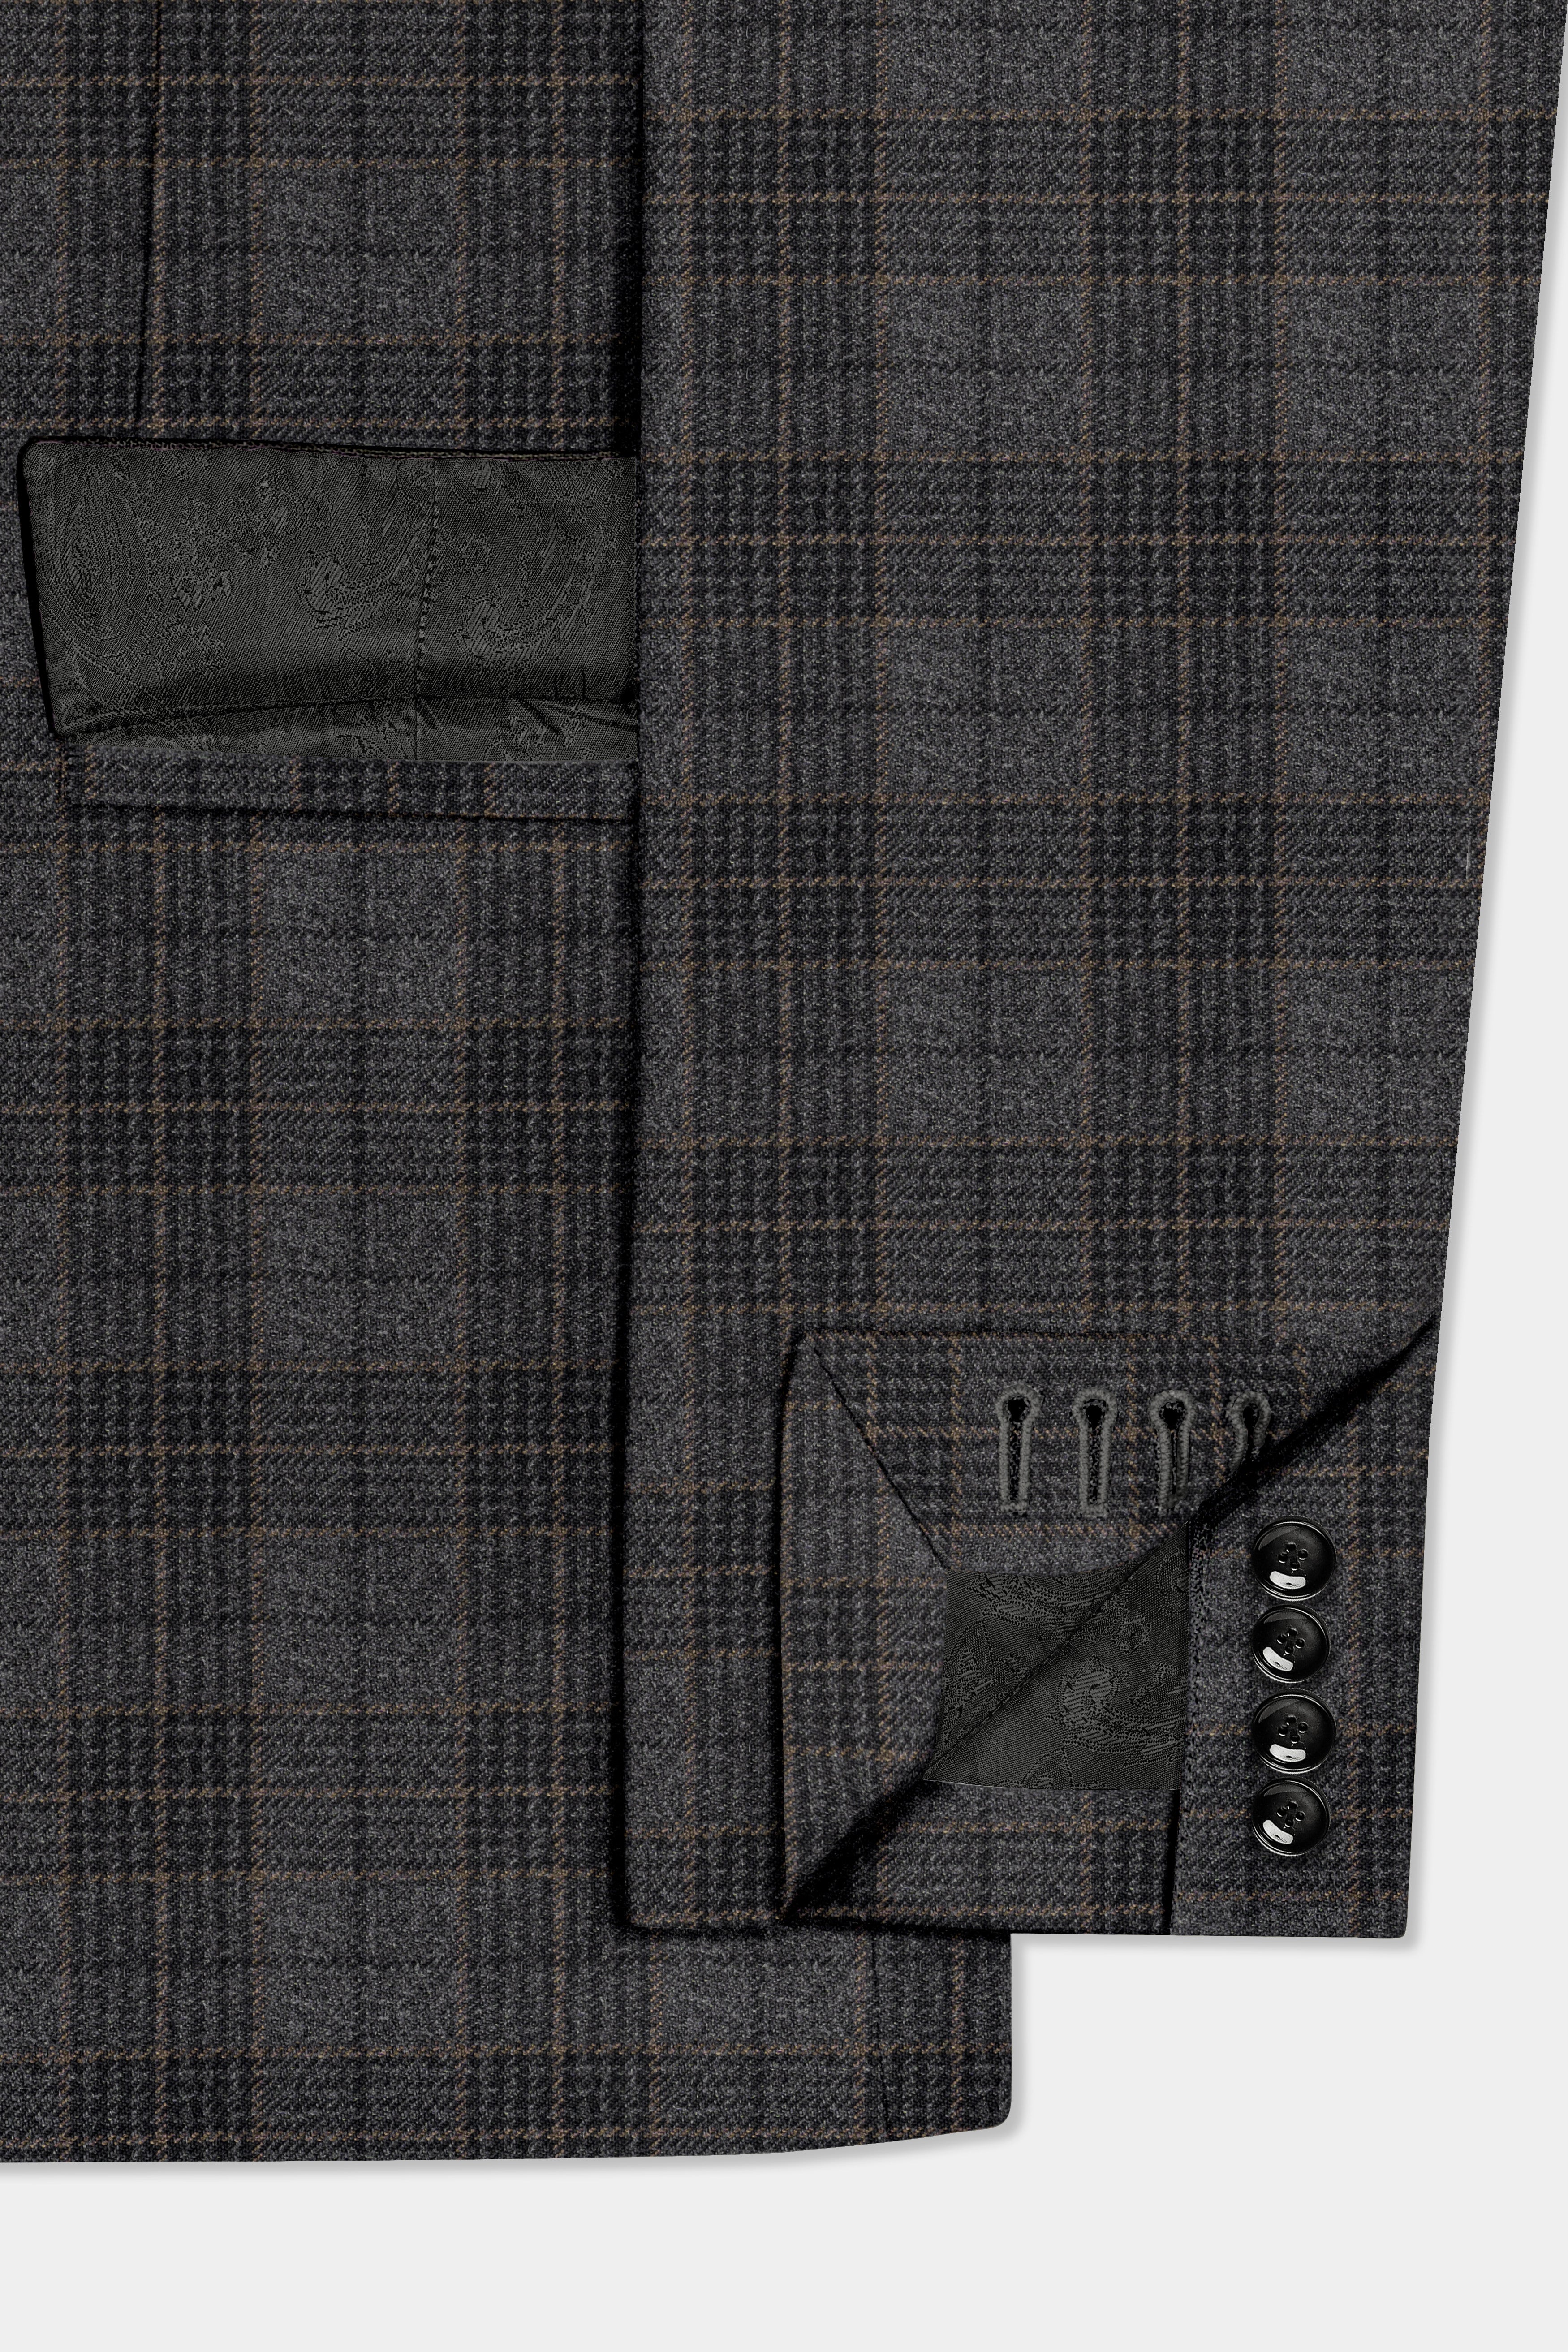 Charcoal Gray Plaid Tweed Suit